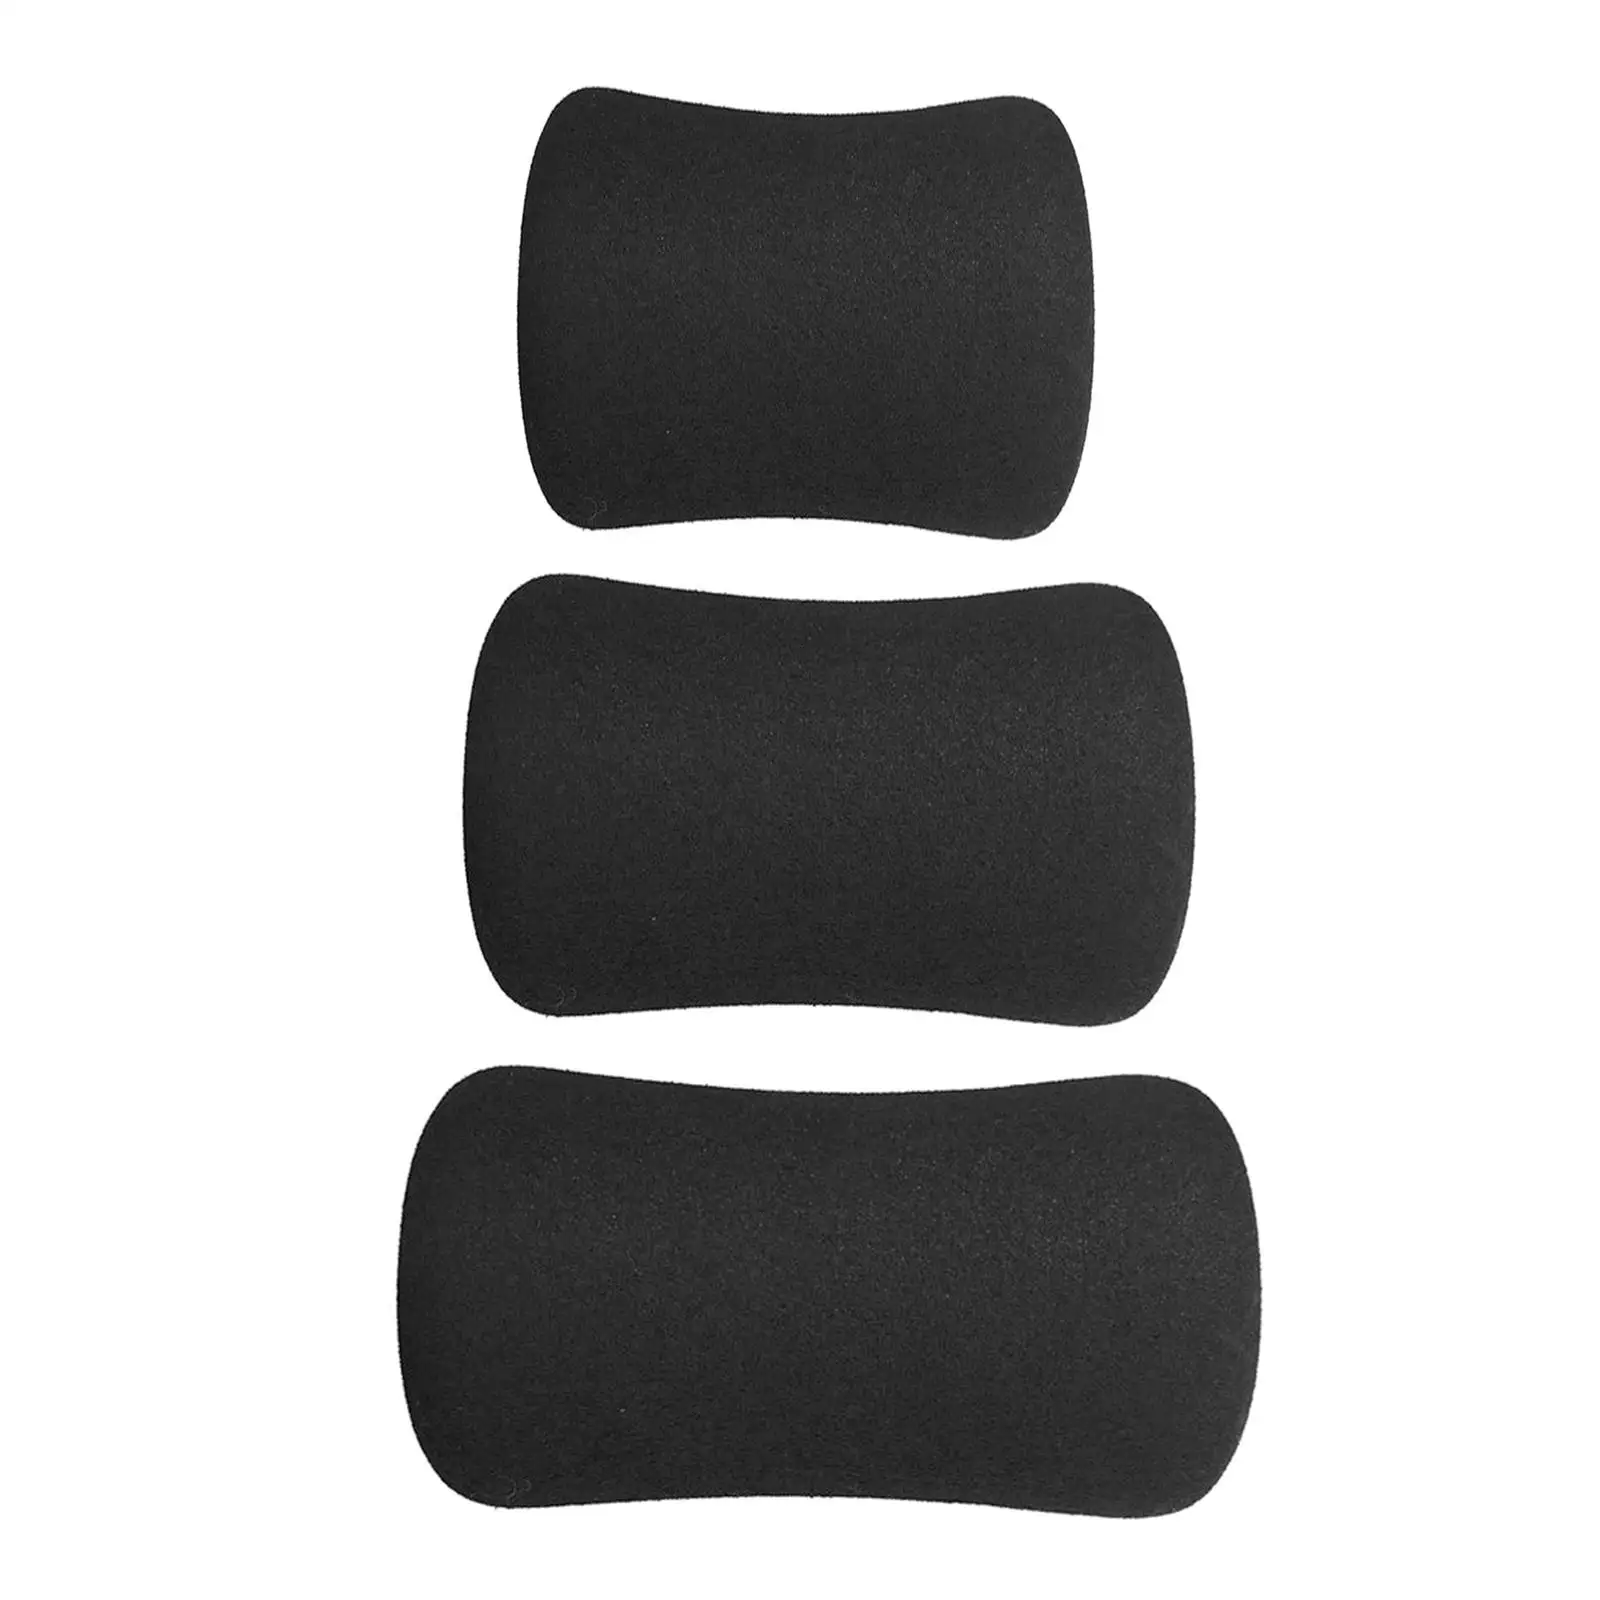 Foam Grips Replacements Handle Tube Foot Pads for Home Gym Strength Training Sit